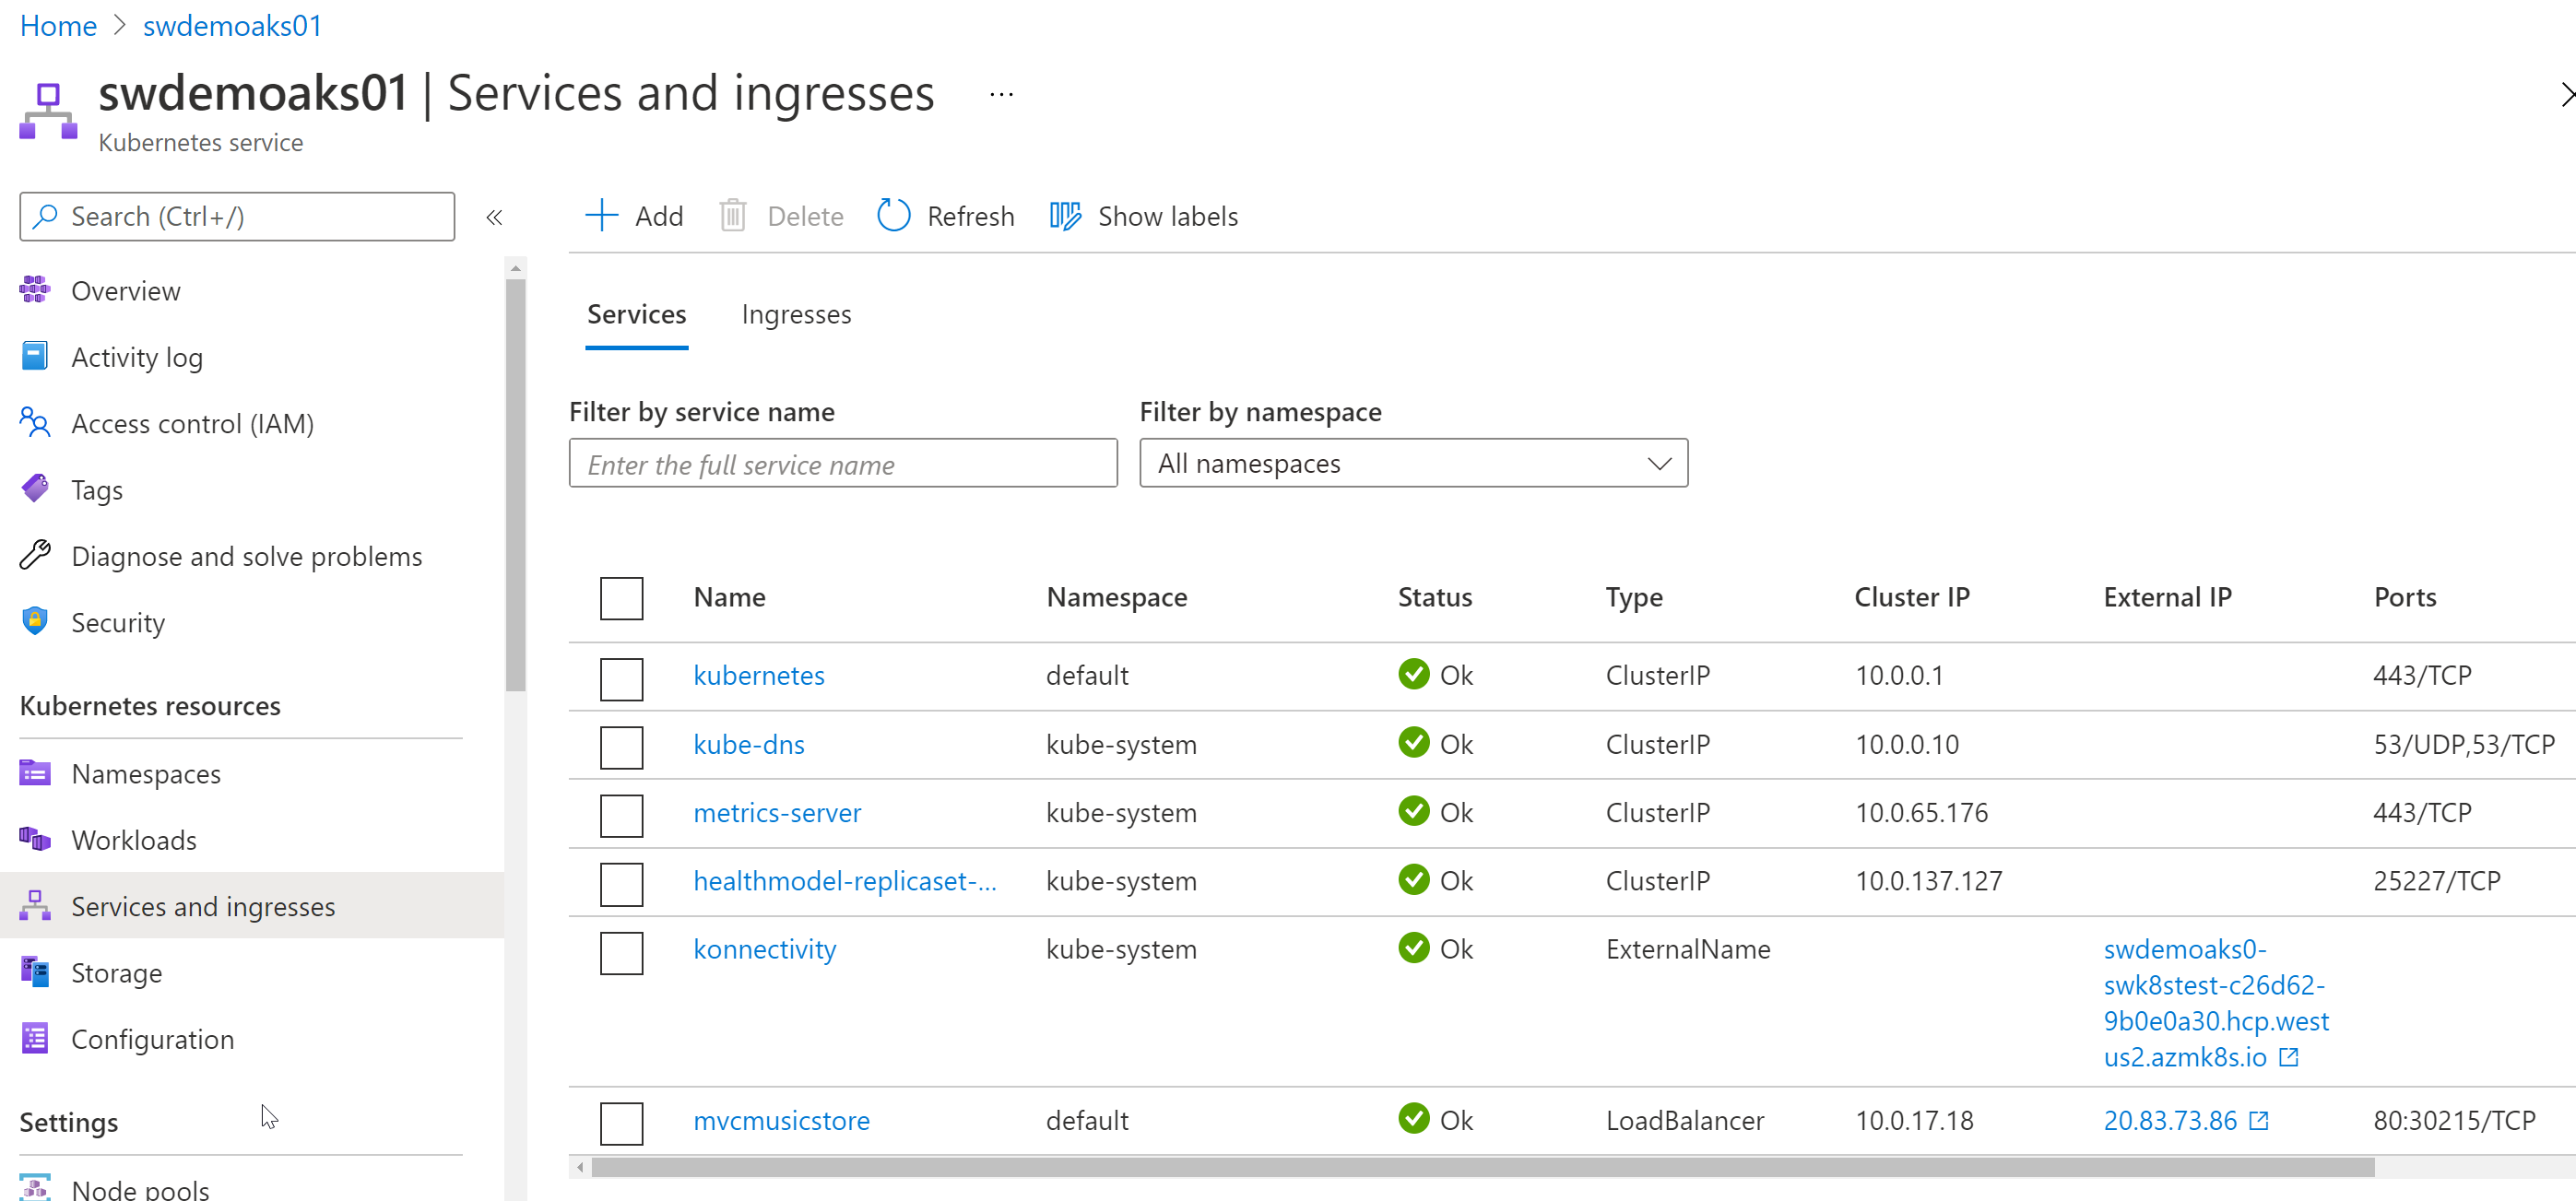 Services and ingresses view in Azure Kubernetes Service blade in the Azure Portal. Our new Service is at the bottom.